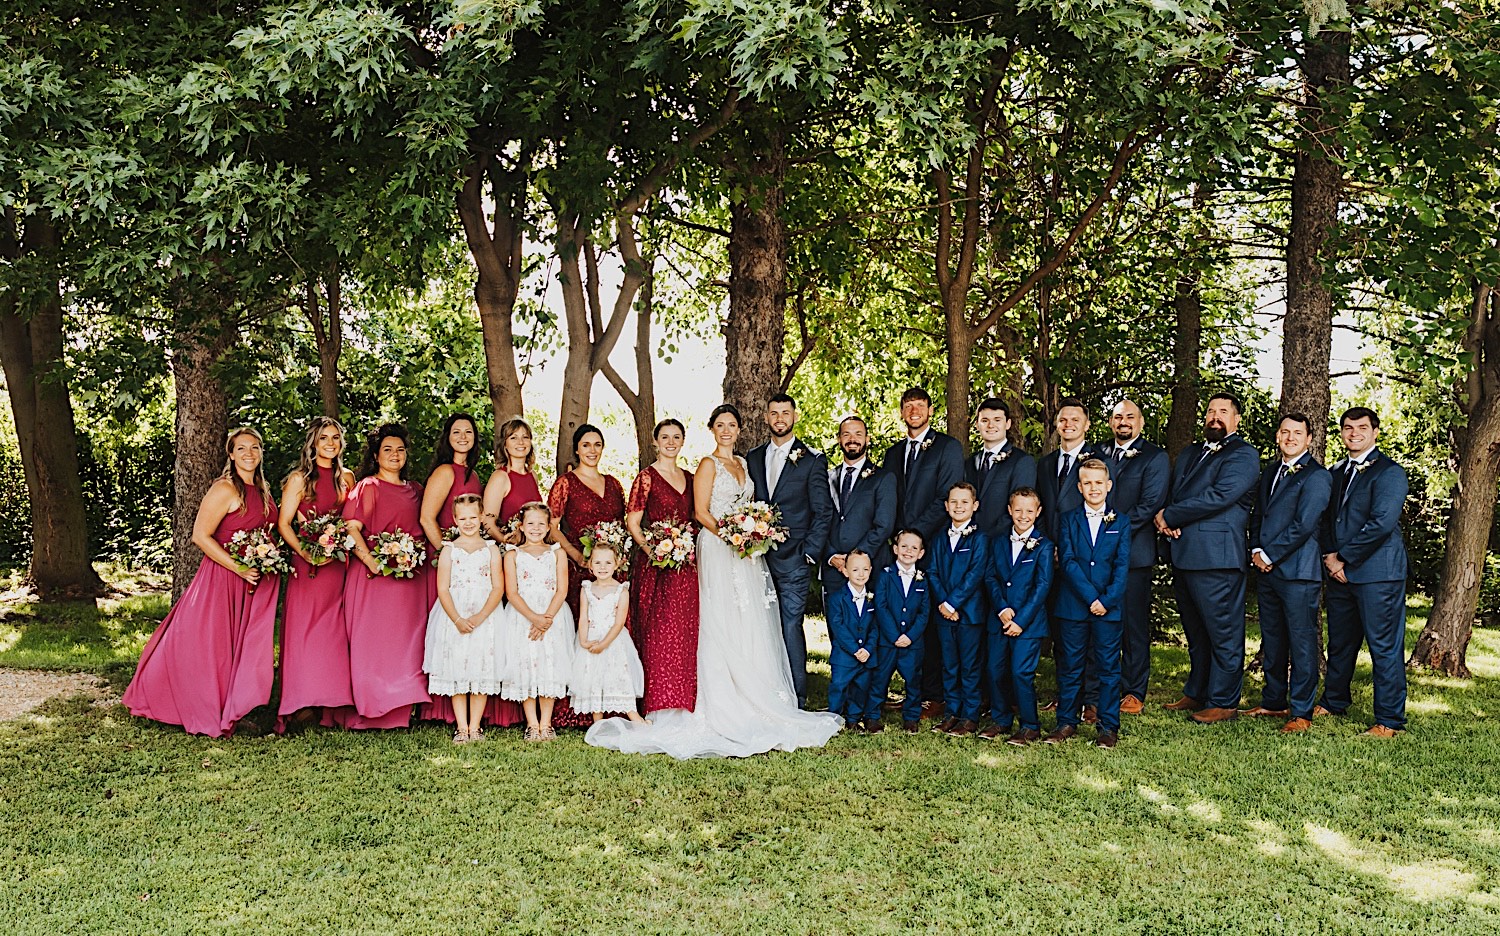 A bride and groom stand with their wedding parties, flower girls, and ring bearers in front of a row of trees at the wedding venue Legacy Hill Farm